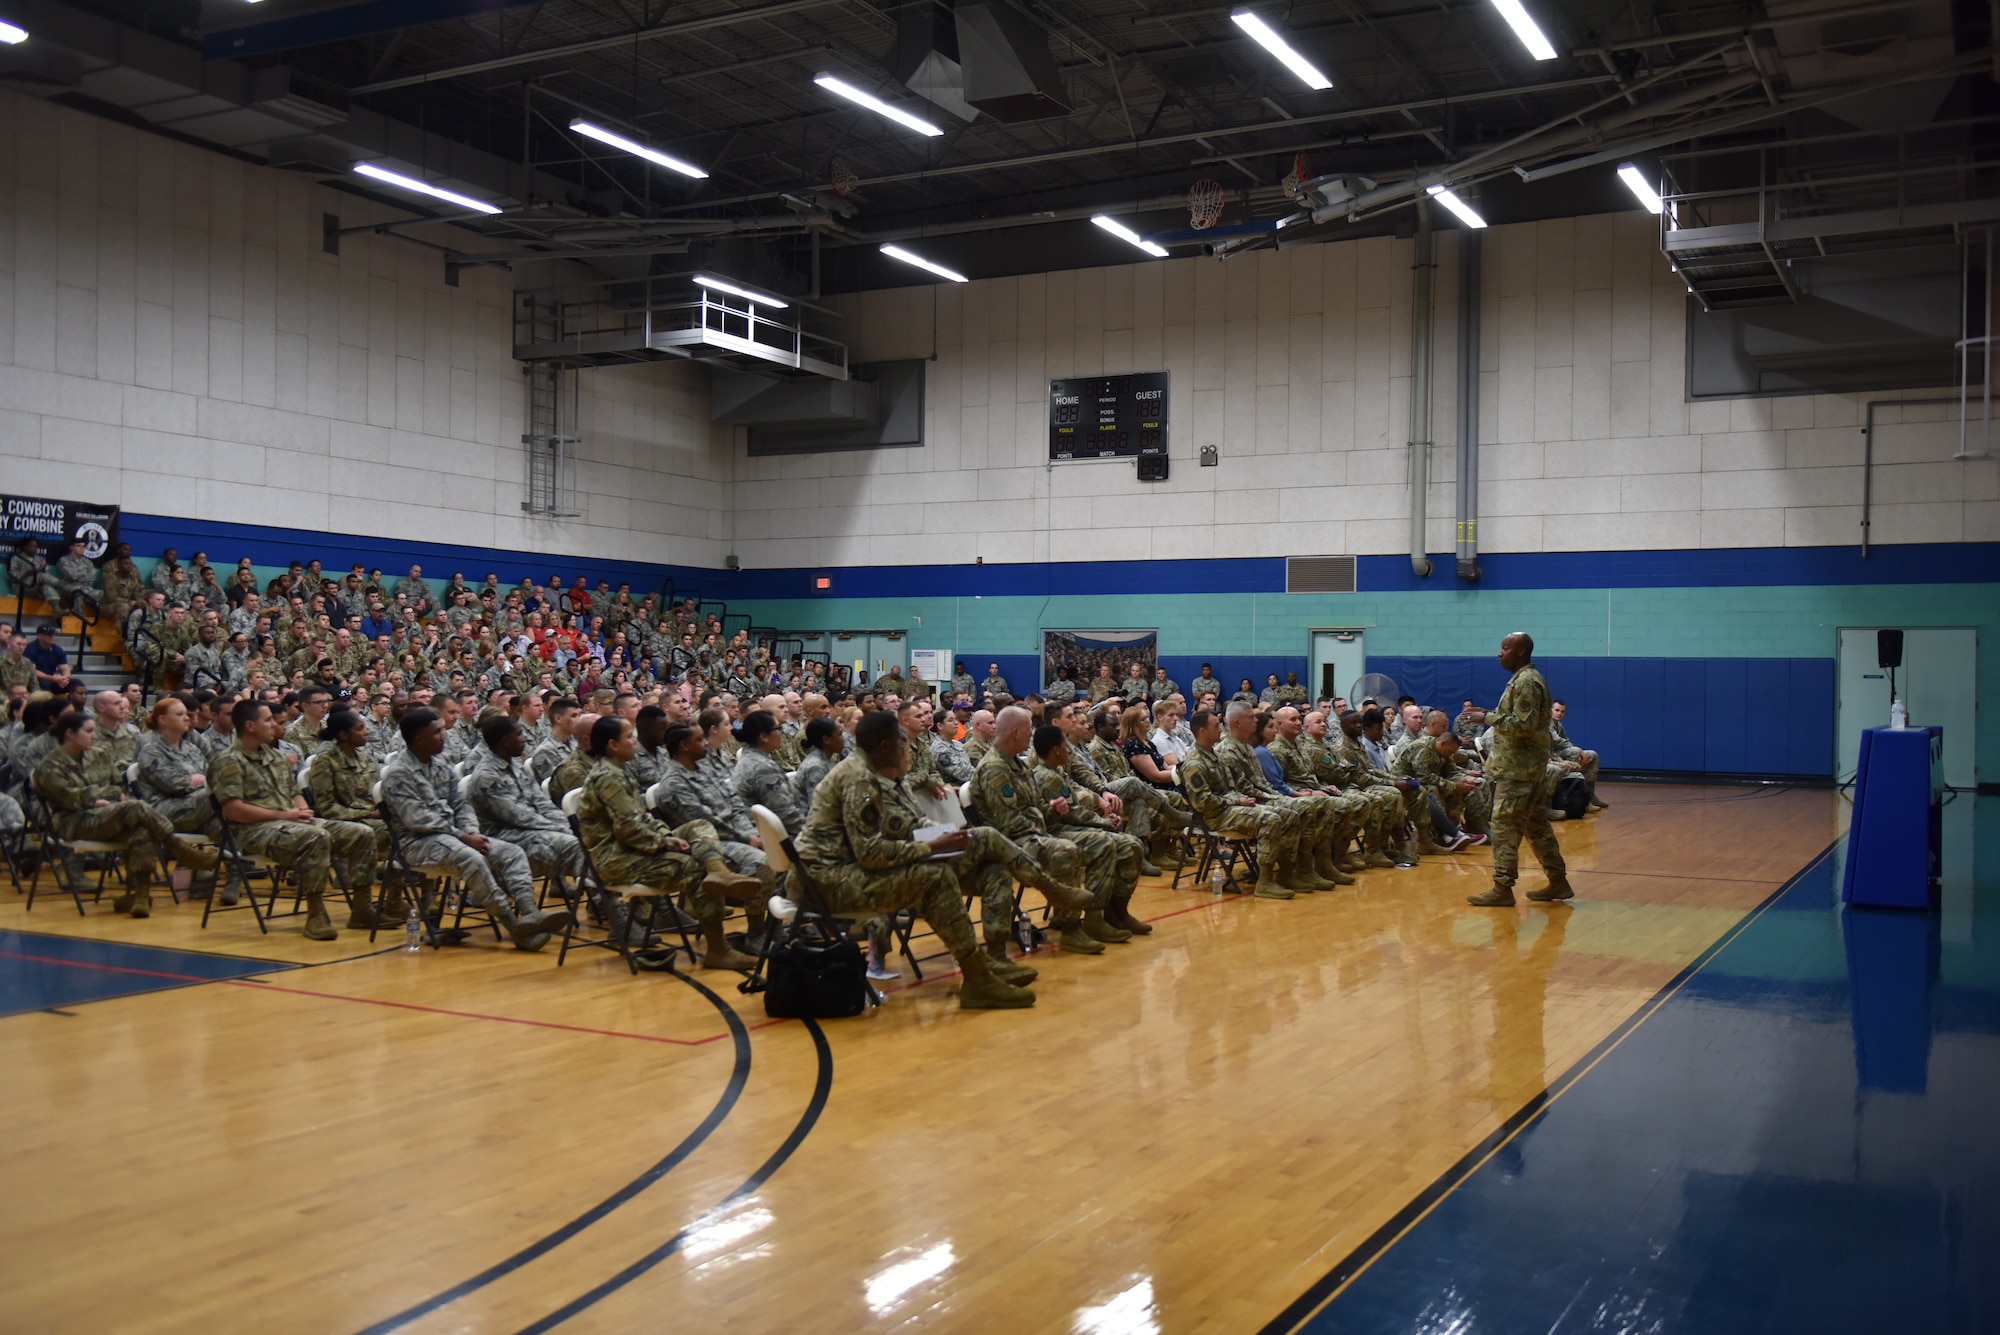 Chief Master Sergeant of the Air Force Kaleth O. Wright speaks with members of the 17th Training Wing at the Mathis Fitness Center on Goodfellow Air Force Base, Texas, August 2, 2019. Chief Wright hosted an all-call at the end of his base tour after visiting several base organizations and speaking with Goodfellow Airmen and leaders. (U.S. Air Force photo by Senior Airman Seraiah Wolf/Released)